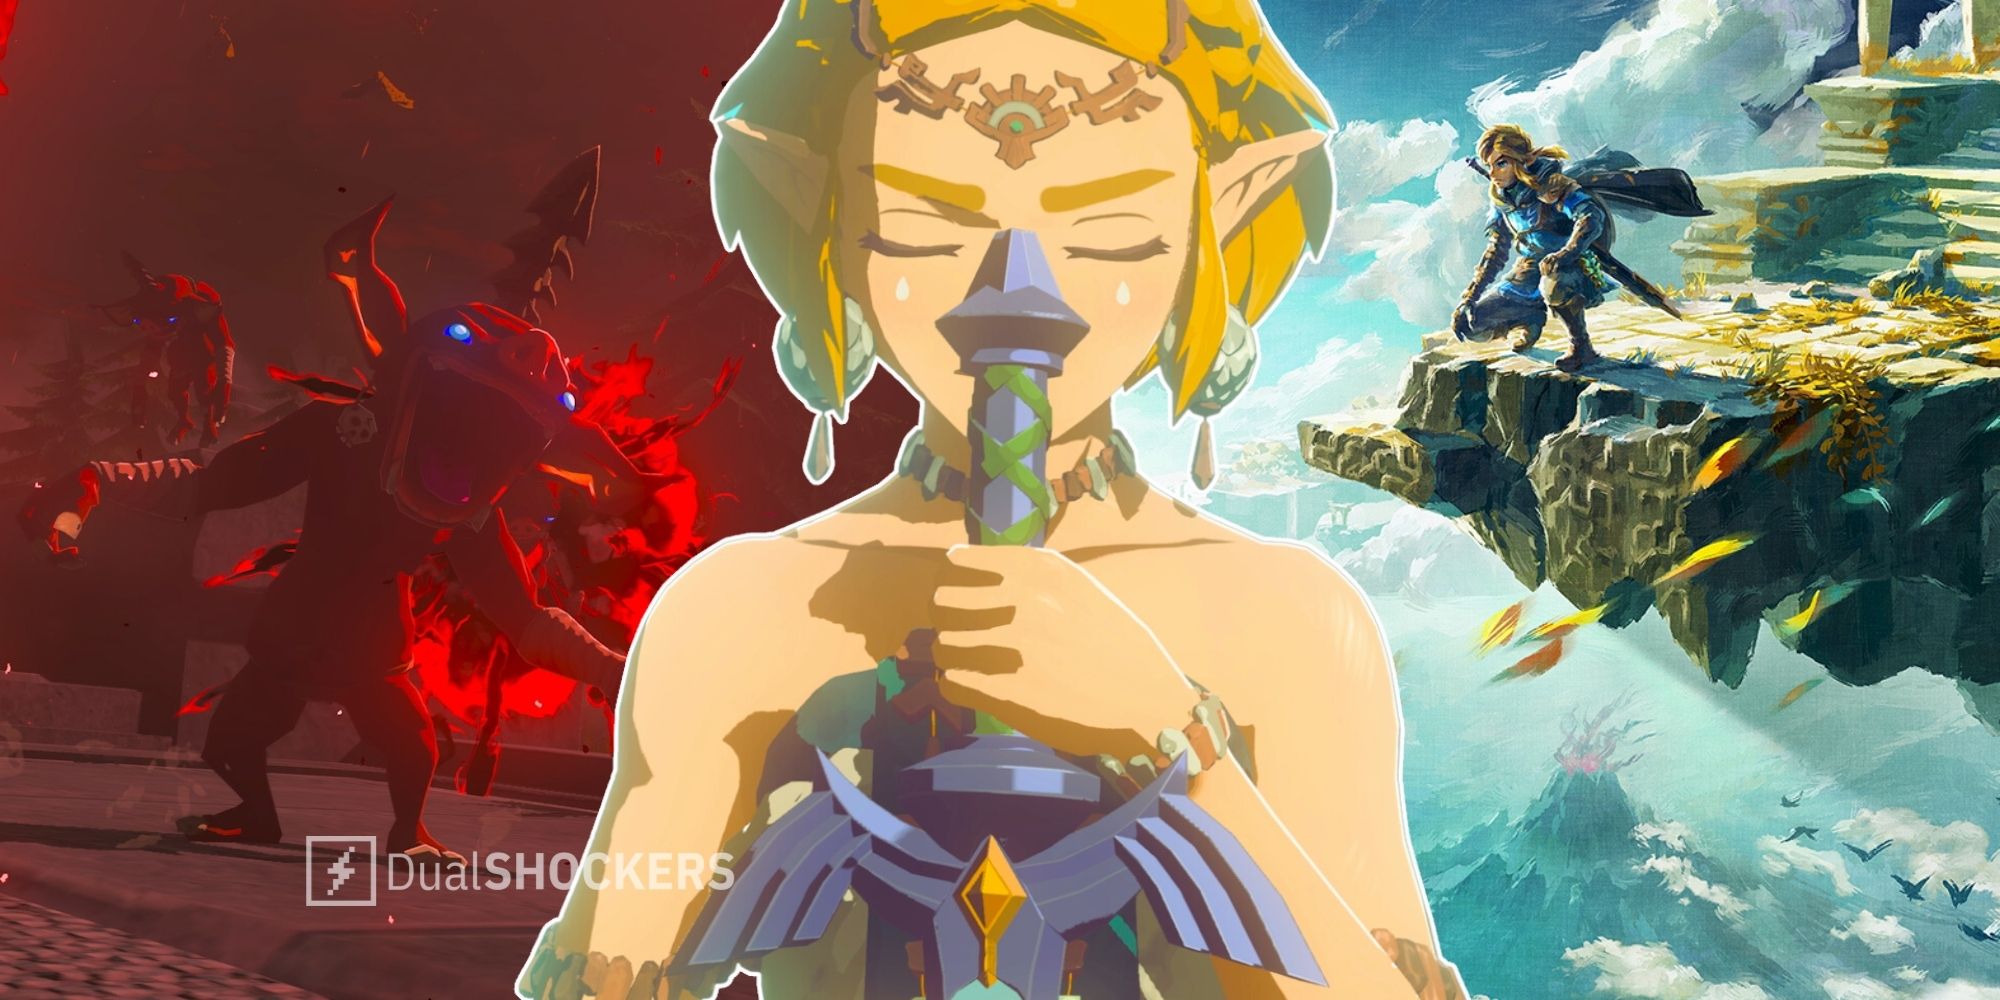 The Legend of Zelda: Tears of the Kingdom release date and news